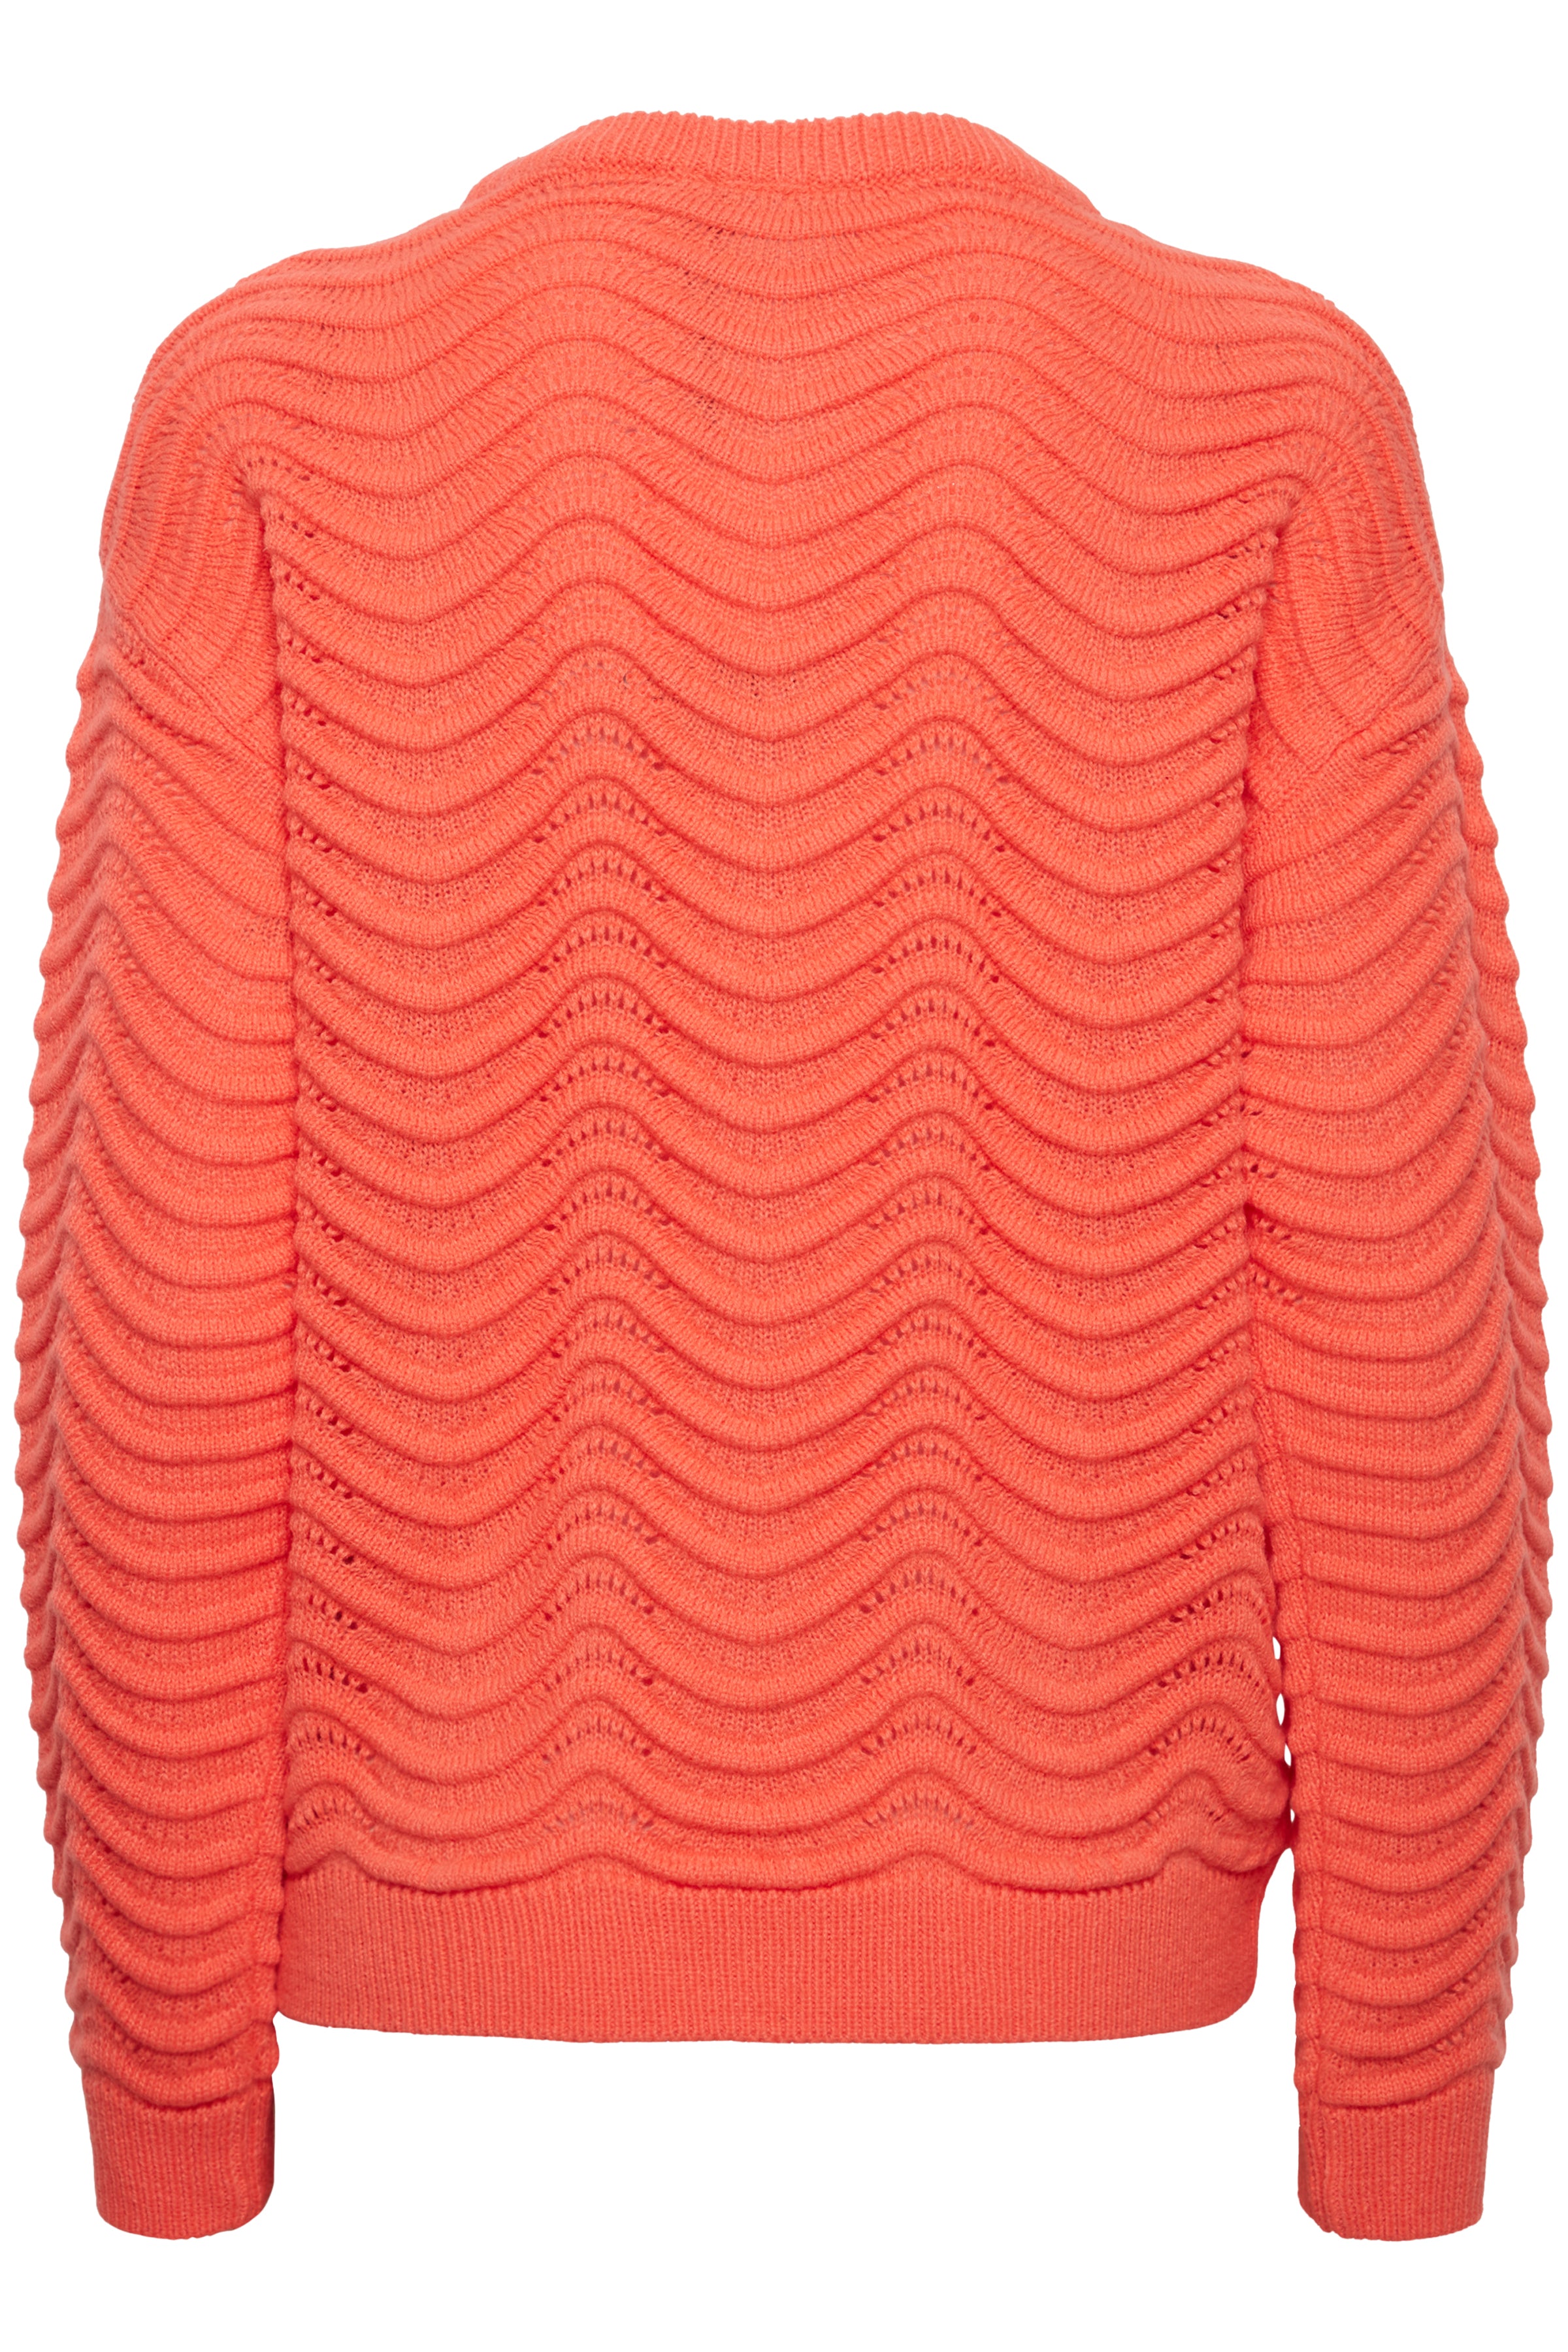 IHAgnete Long Sleeve pullover - Hot Coral